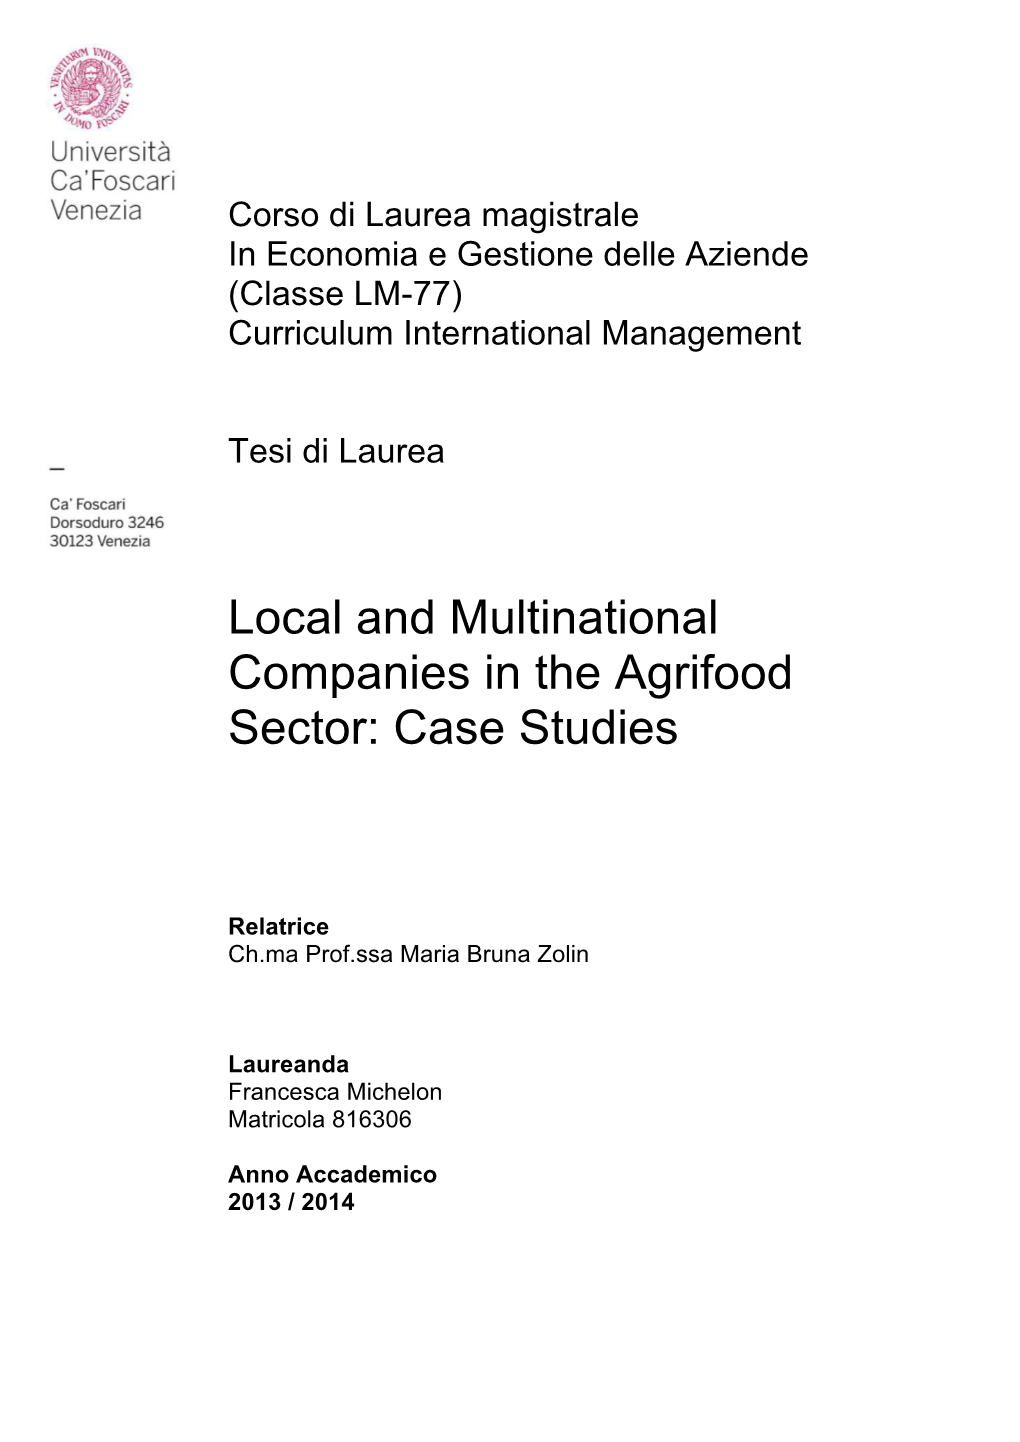 Local and Multinational Companies in the Agrifood Sector: Case Studies